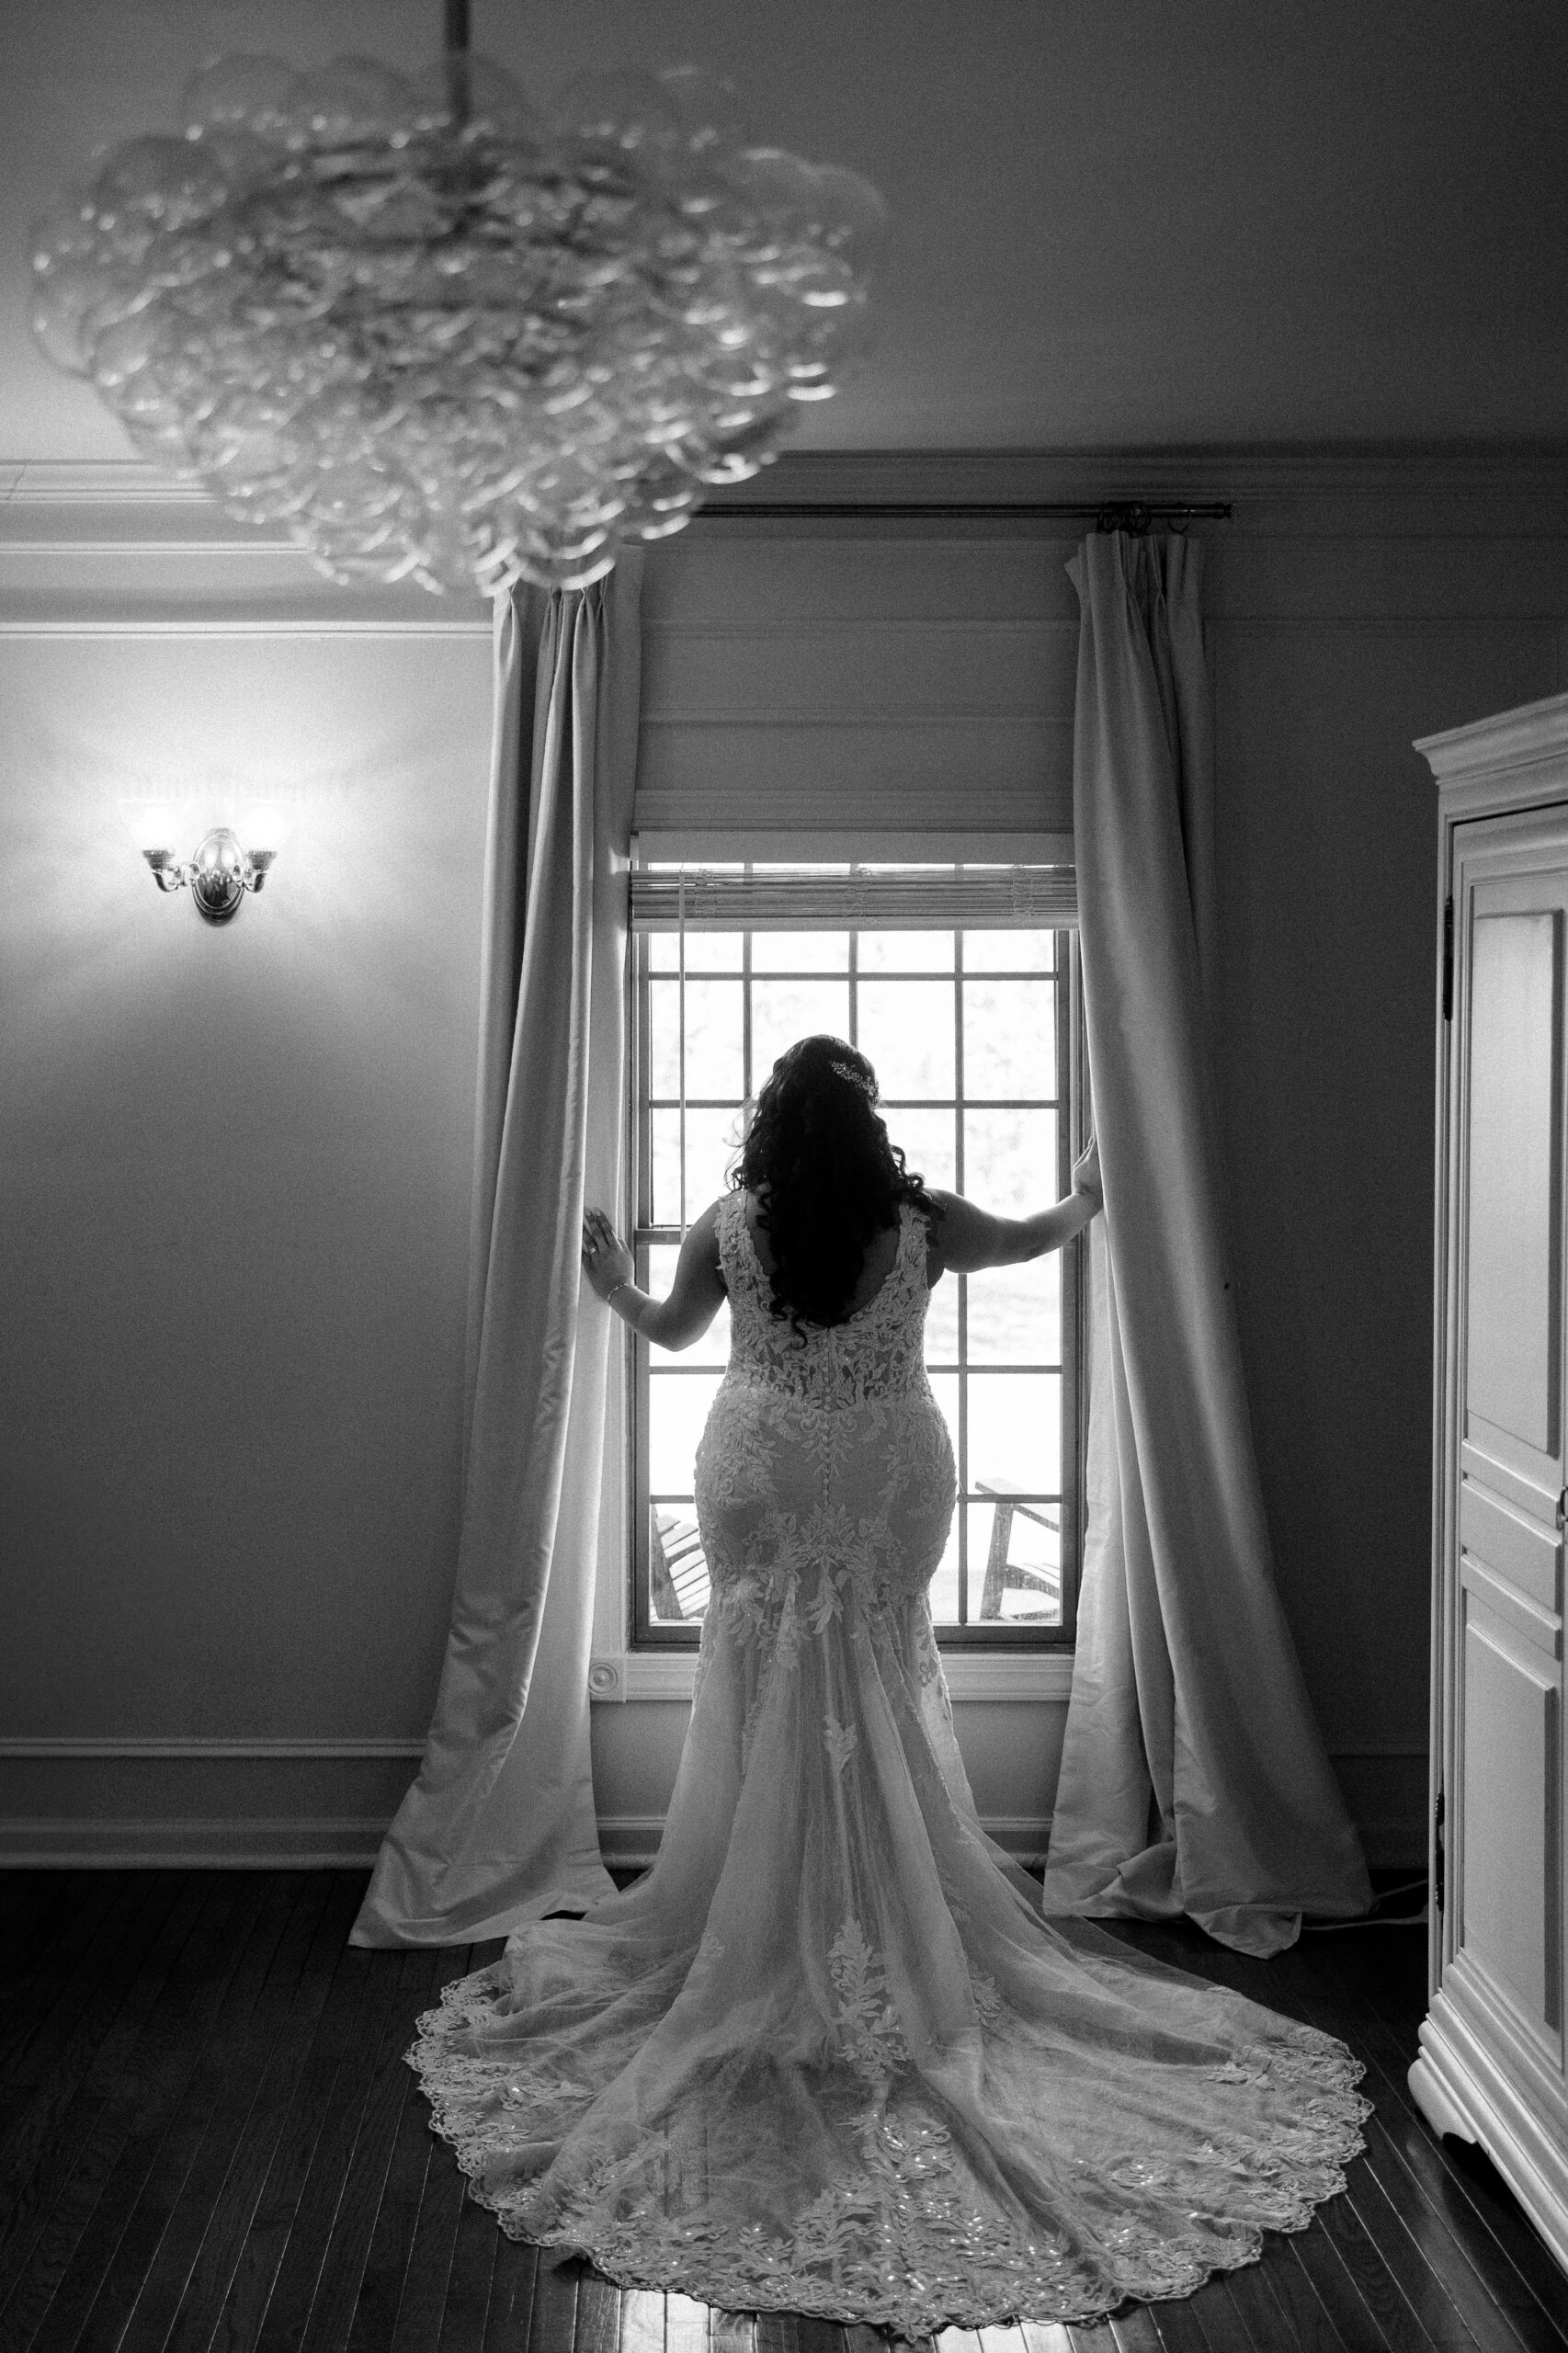 the bride looks out the window of the venue's bridal suite